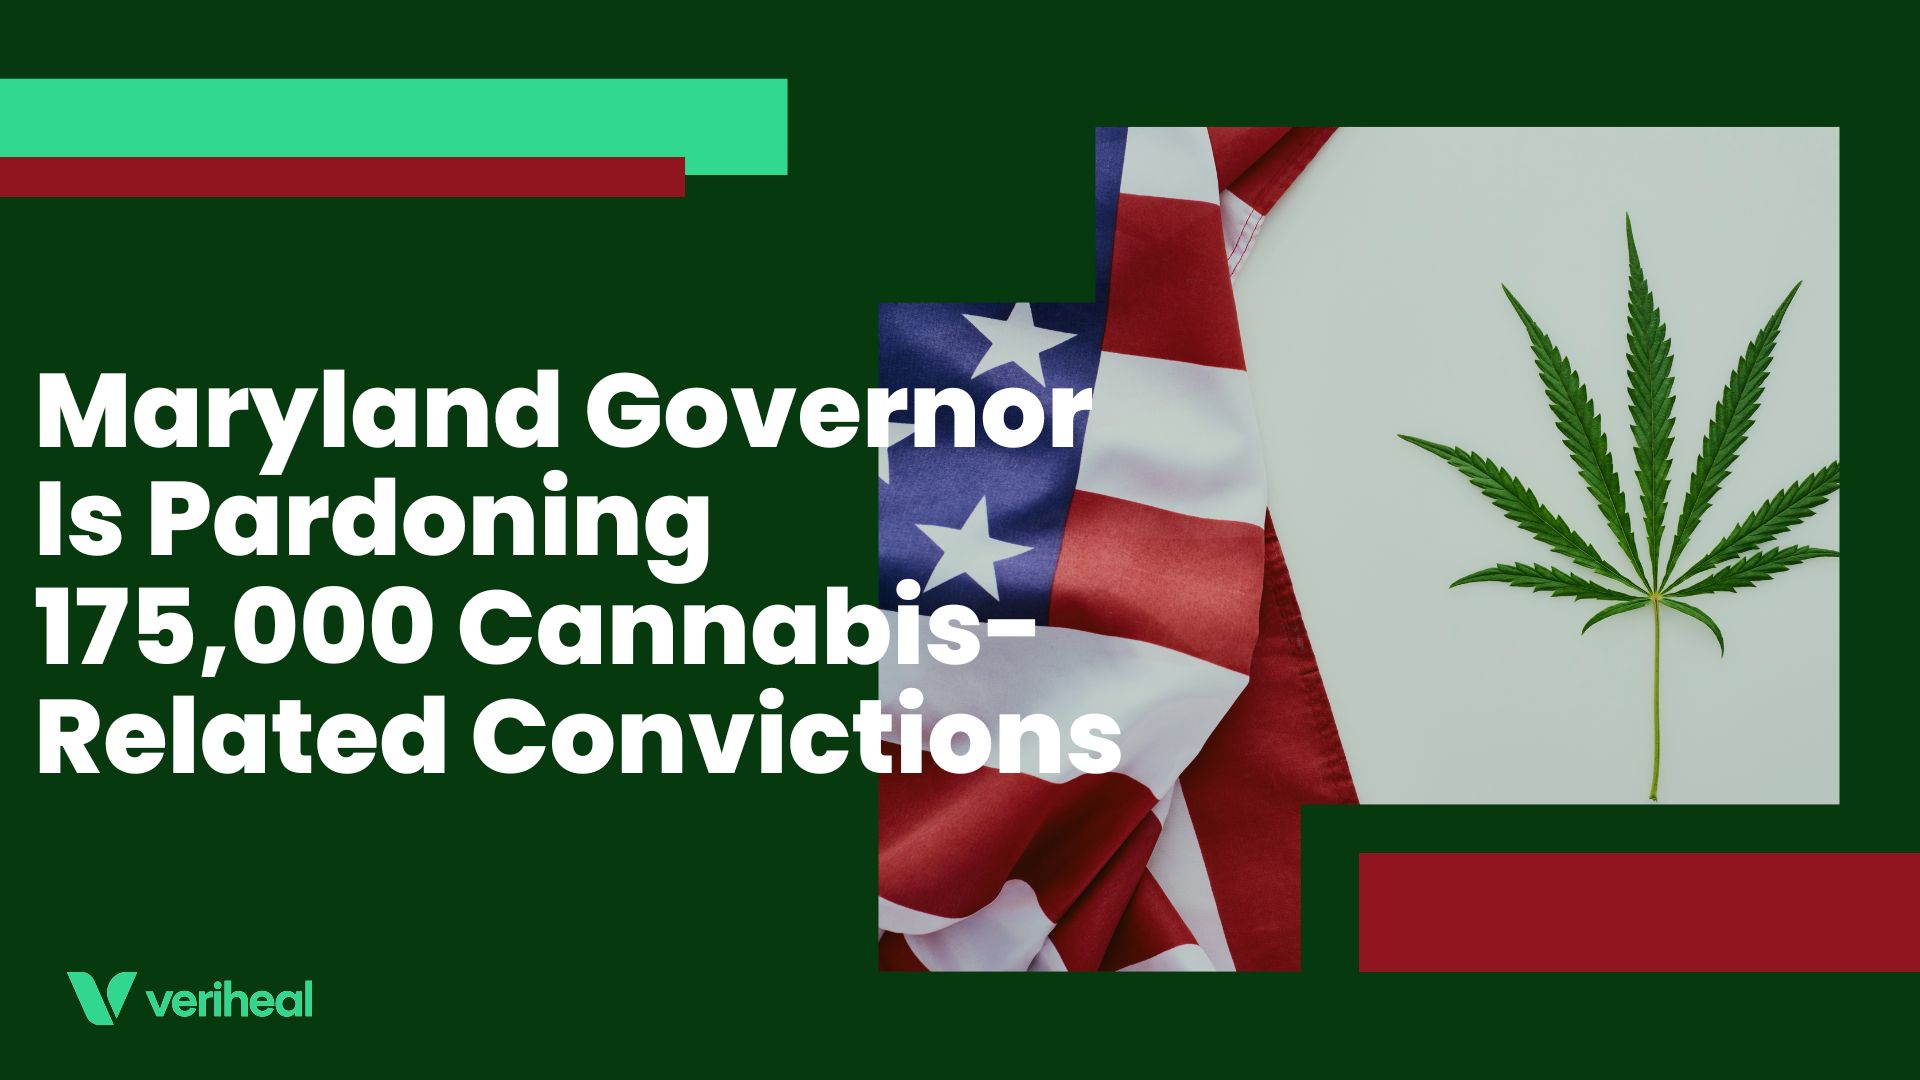 Maryland Governor Is Pardoning 175,000 Cannabis-Related Convictions